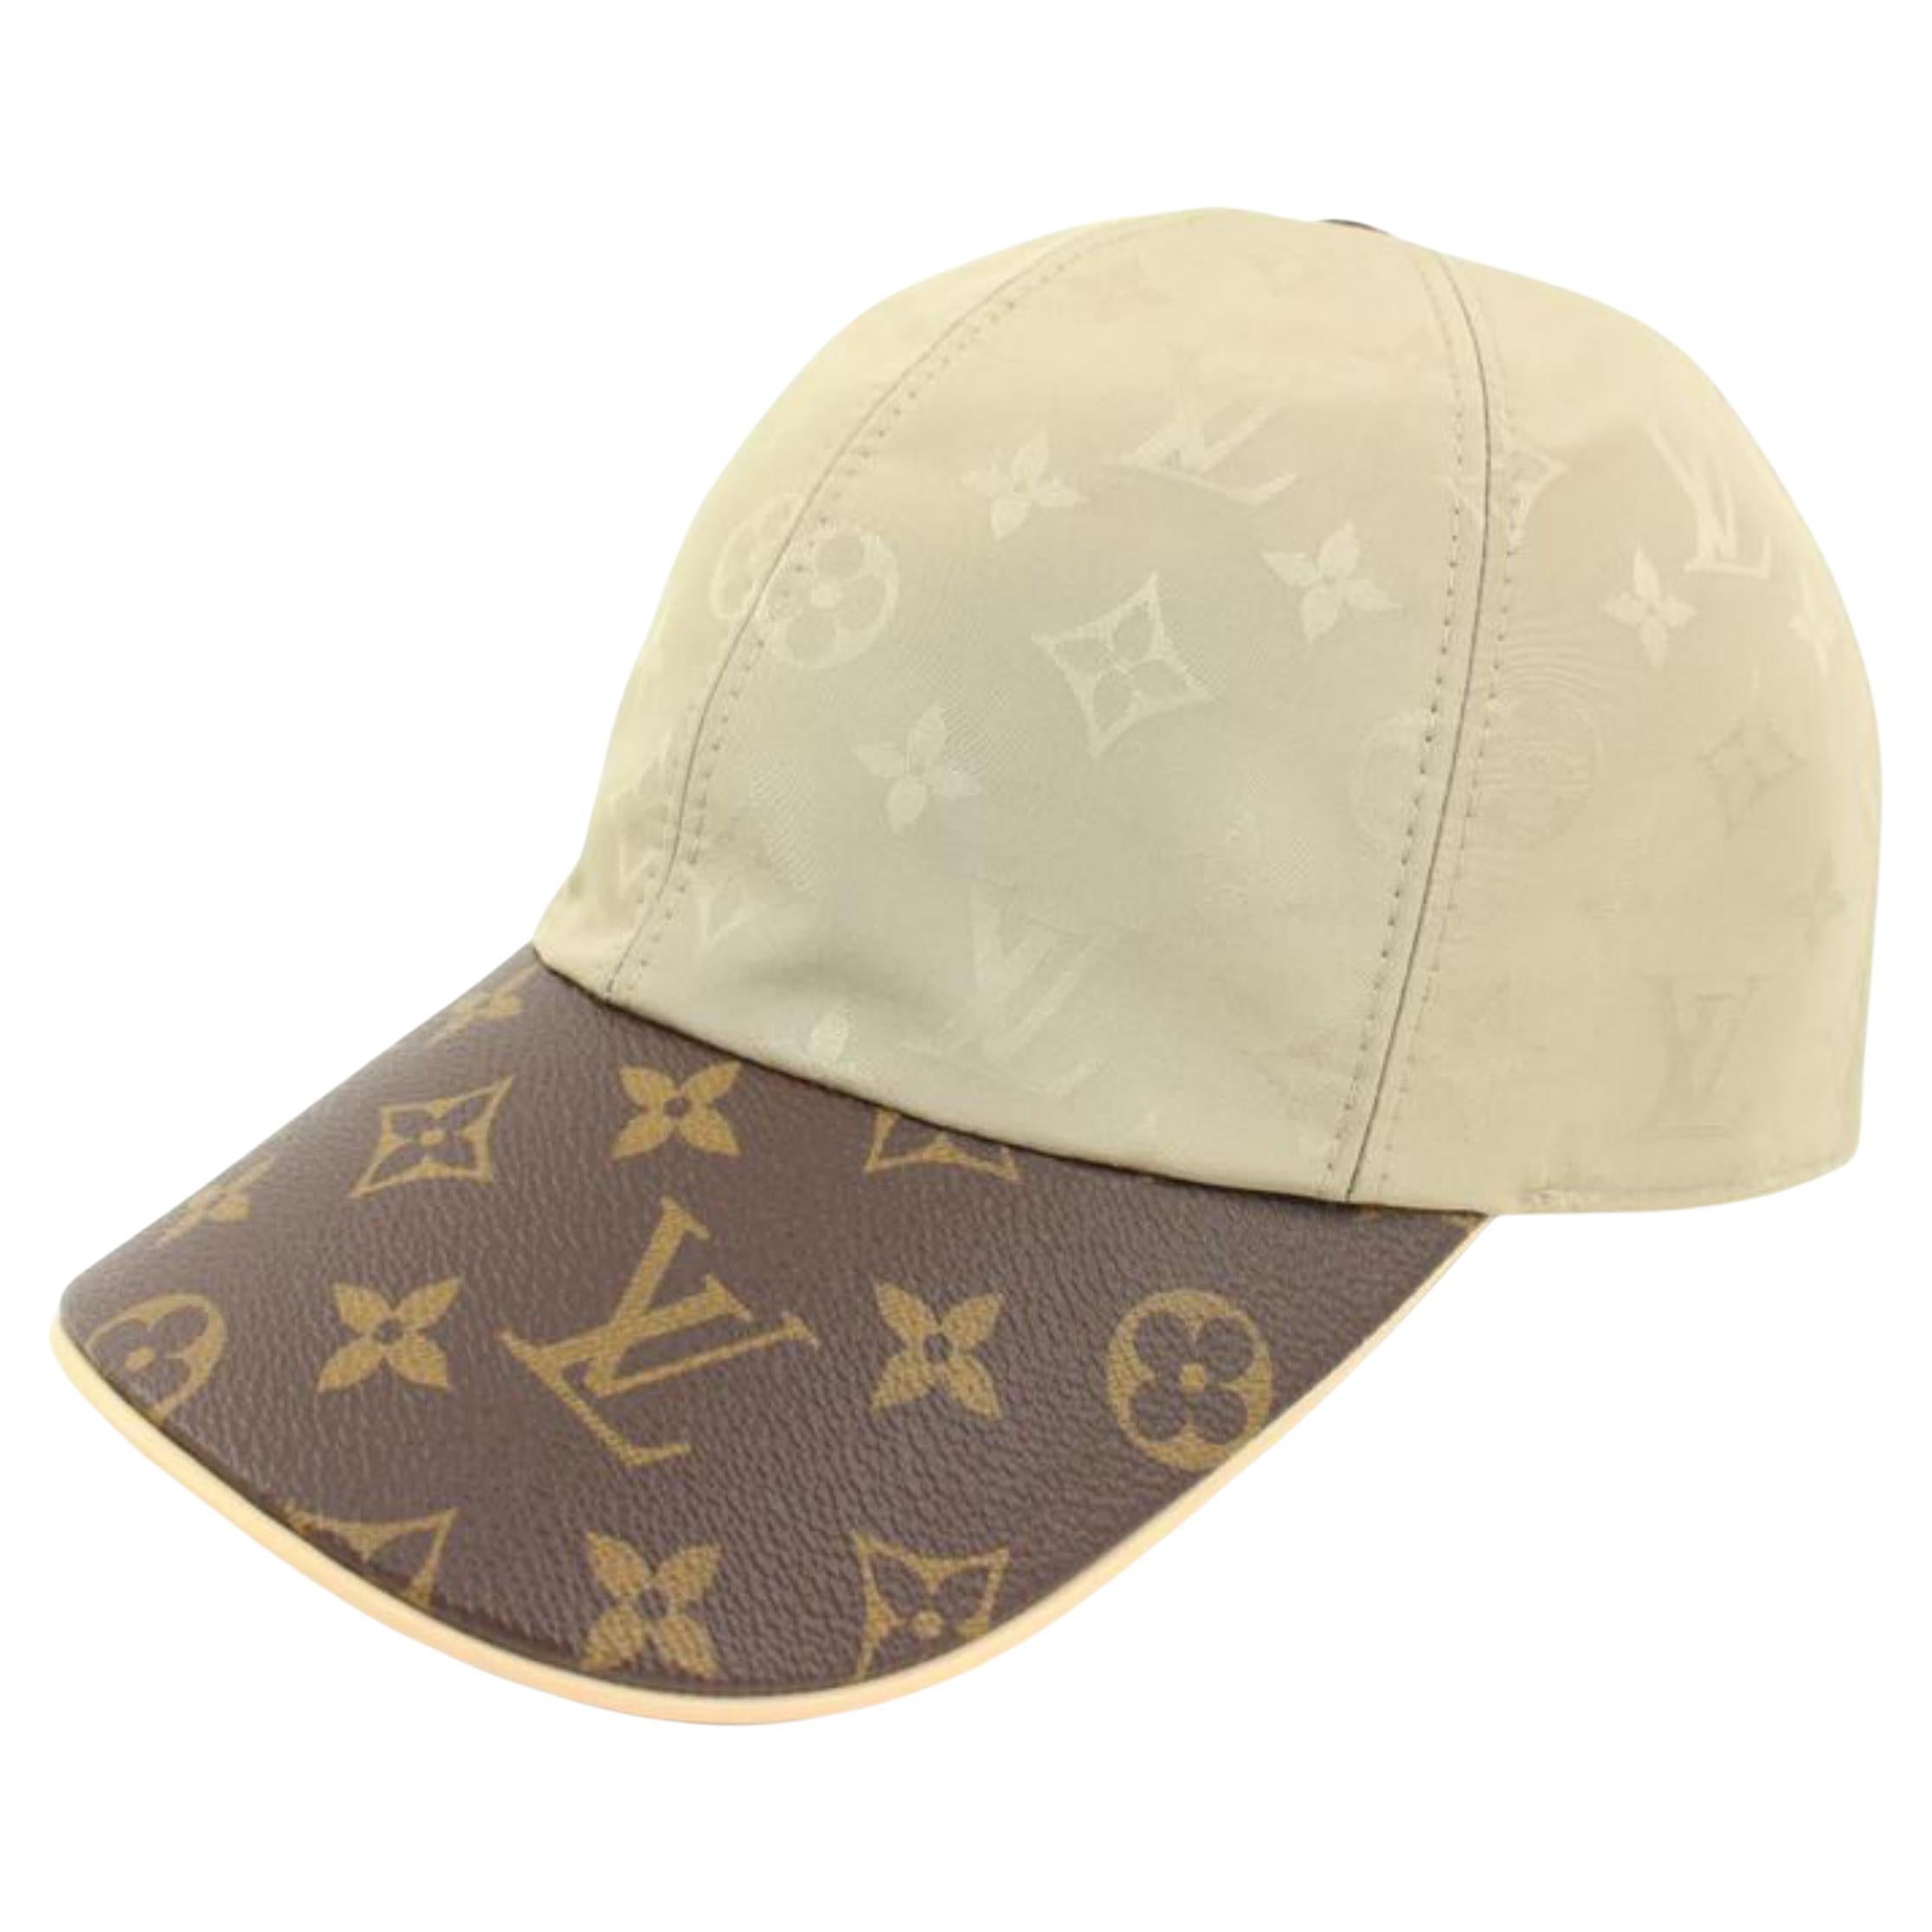 Louis Vuitton Beanie Hat - For Sale on 1stDibs